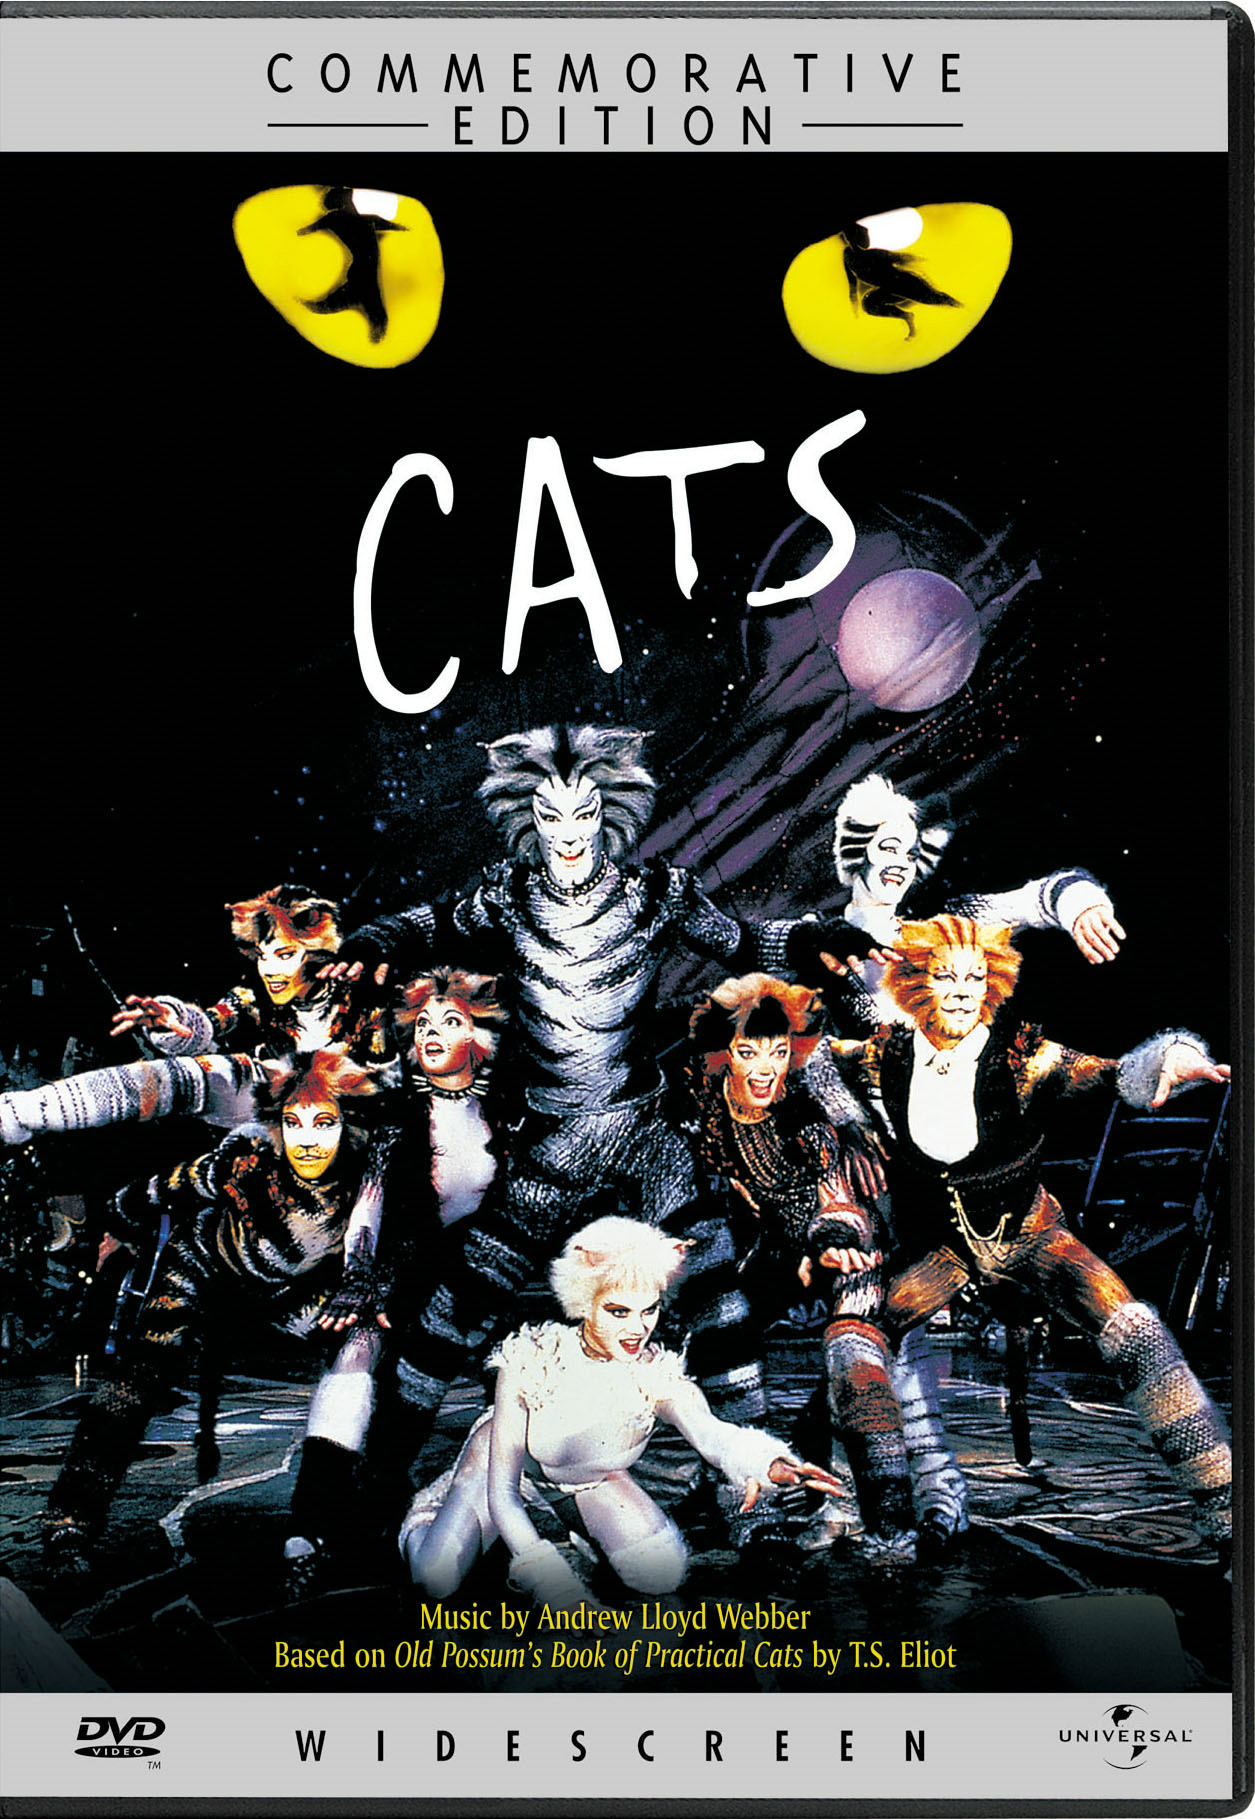 Cats (Commemorative Edition) - DVD [ 1994 ]  - Stage Musicals Music On DVD